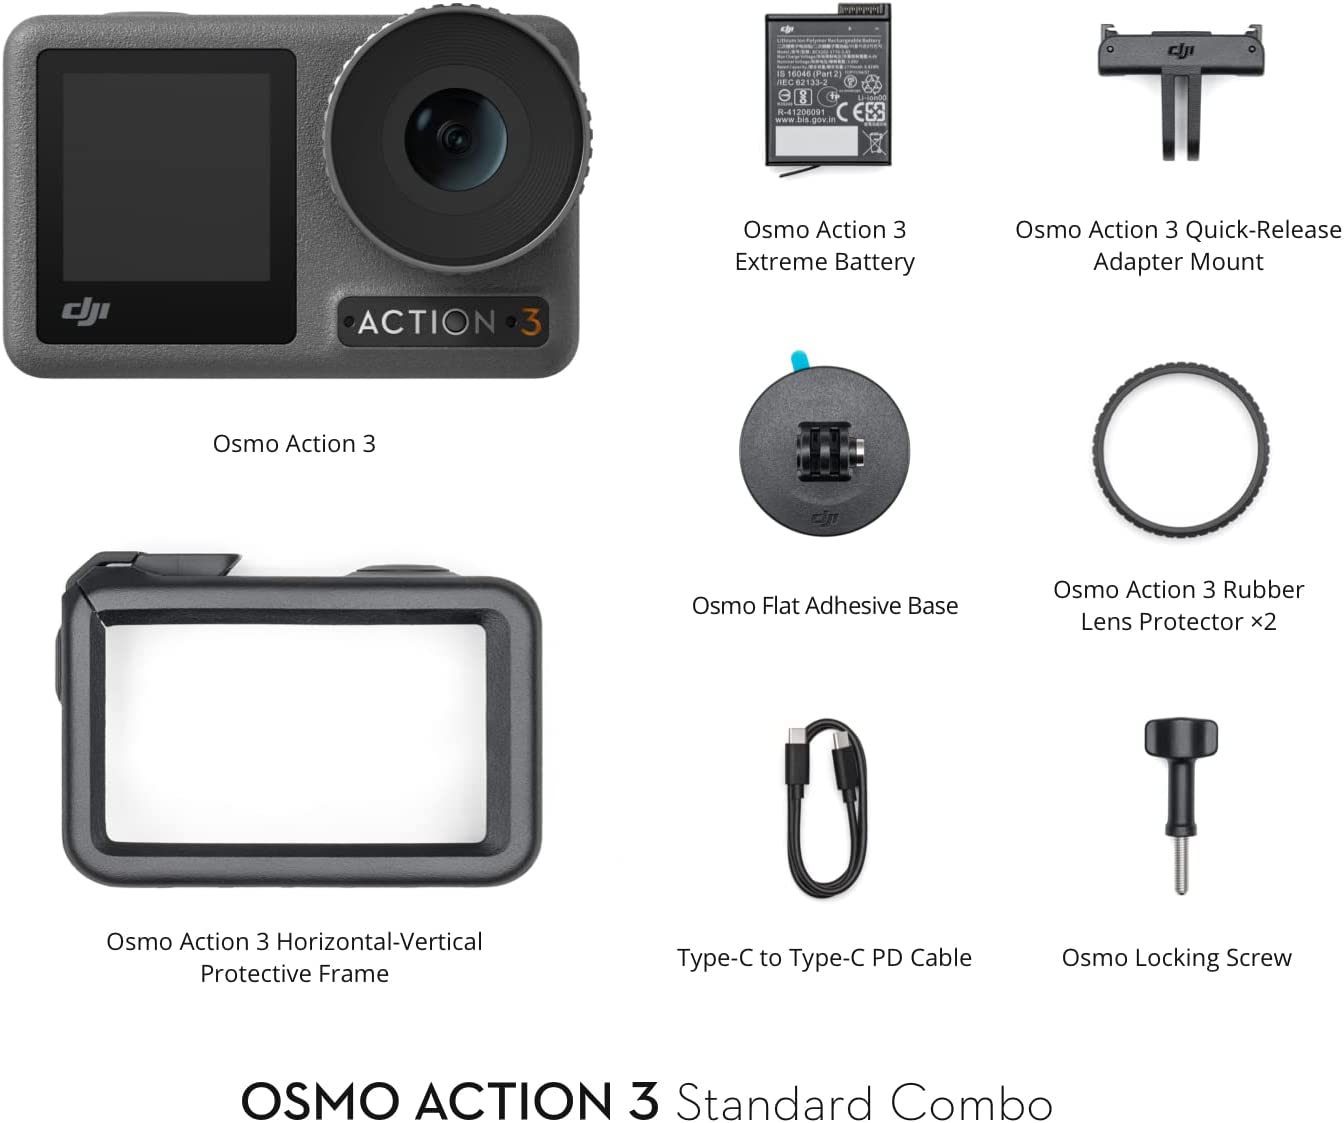 Product Image of DJI Osmo Action 3 Standard Combo - 4K Action Camera